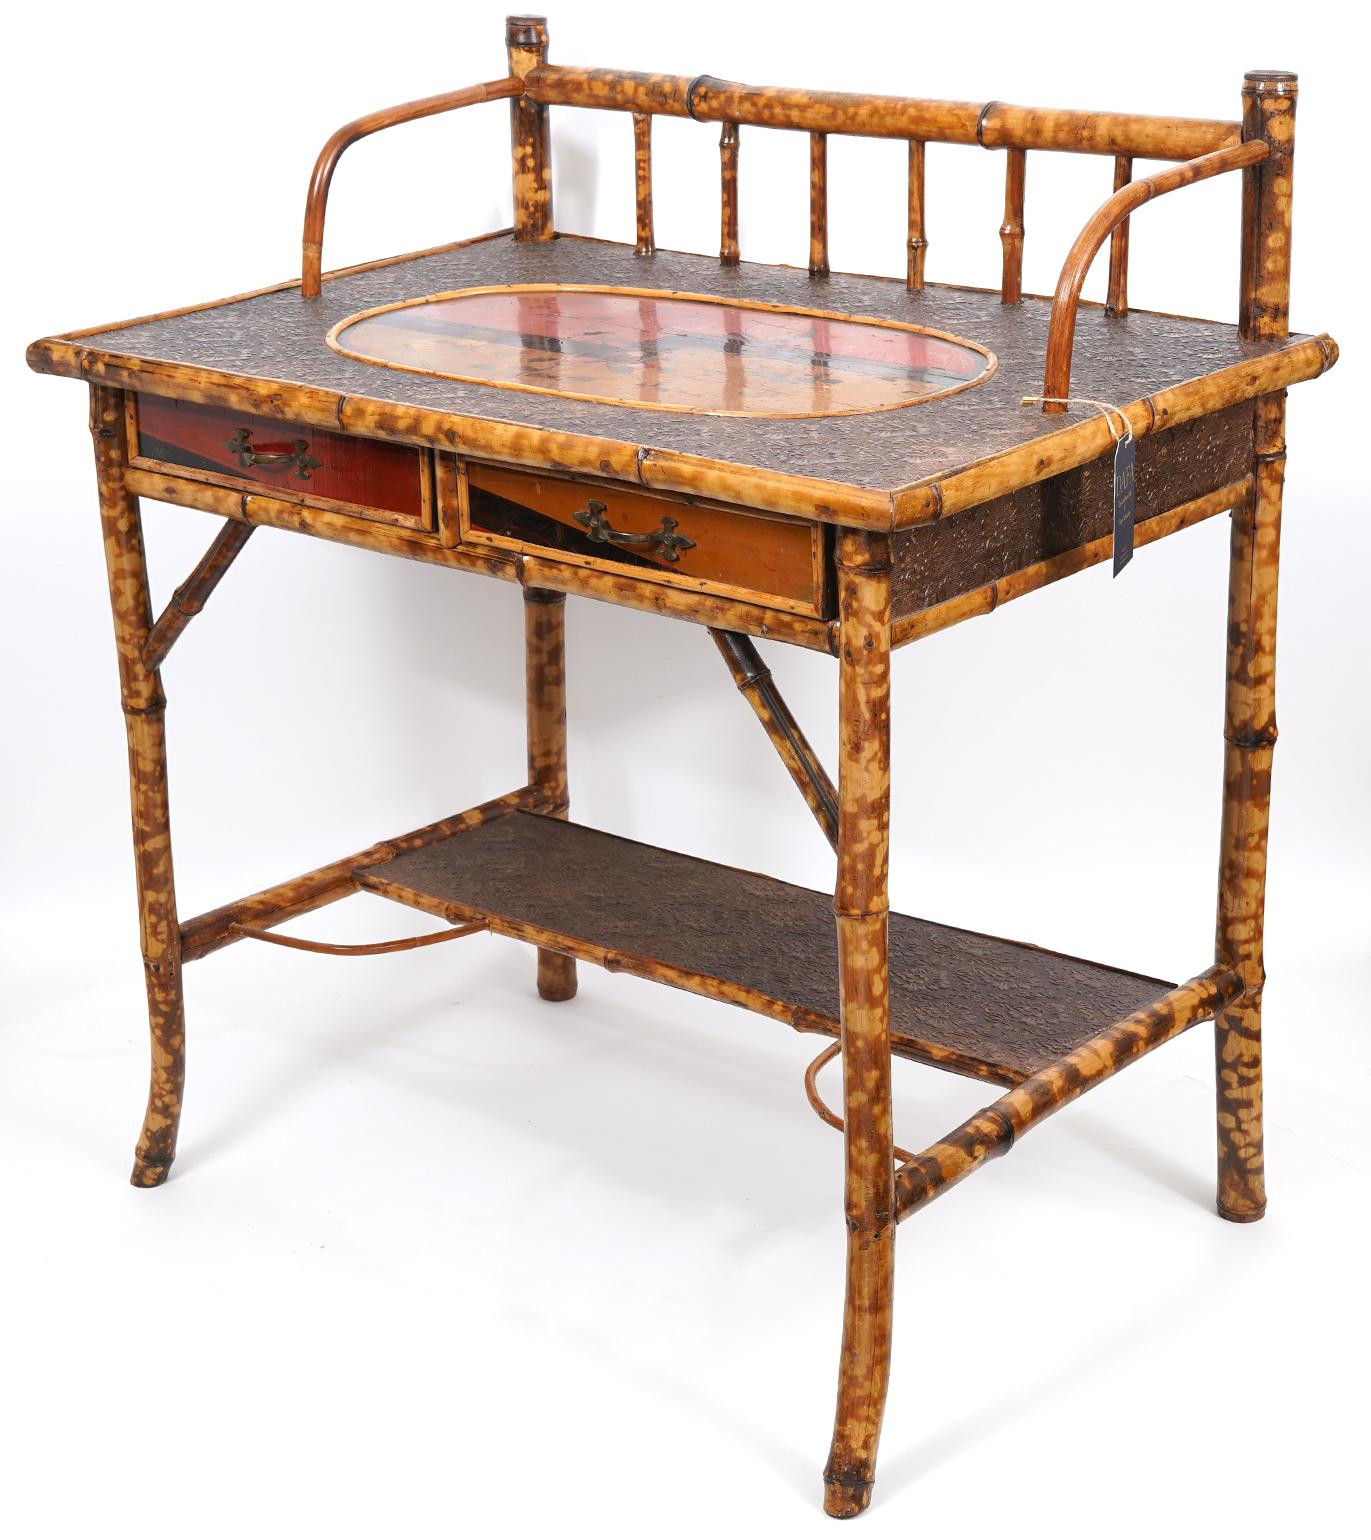 Chinoiserie English Bamboo and Lacquer Two Tier Japanned Writing Desk, Early 20th C.